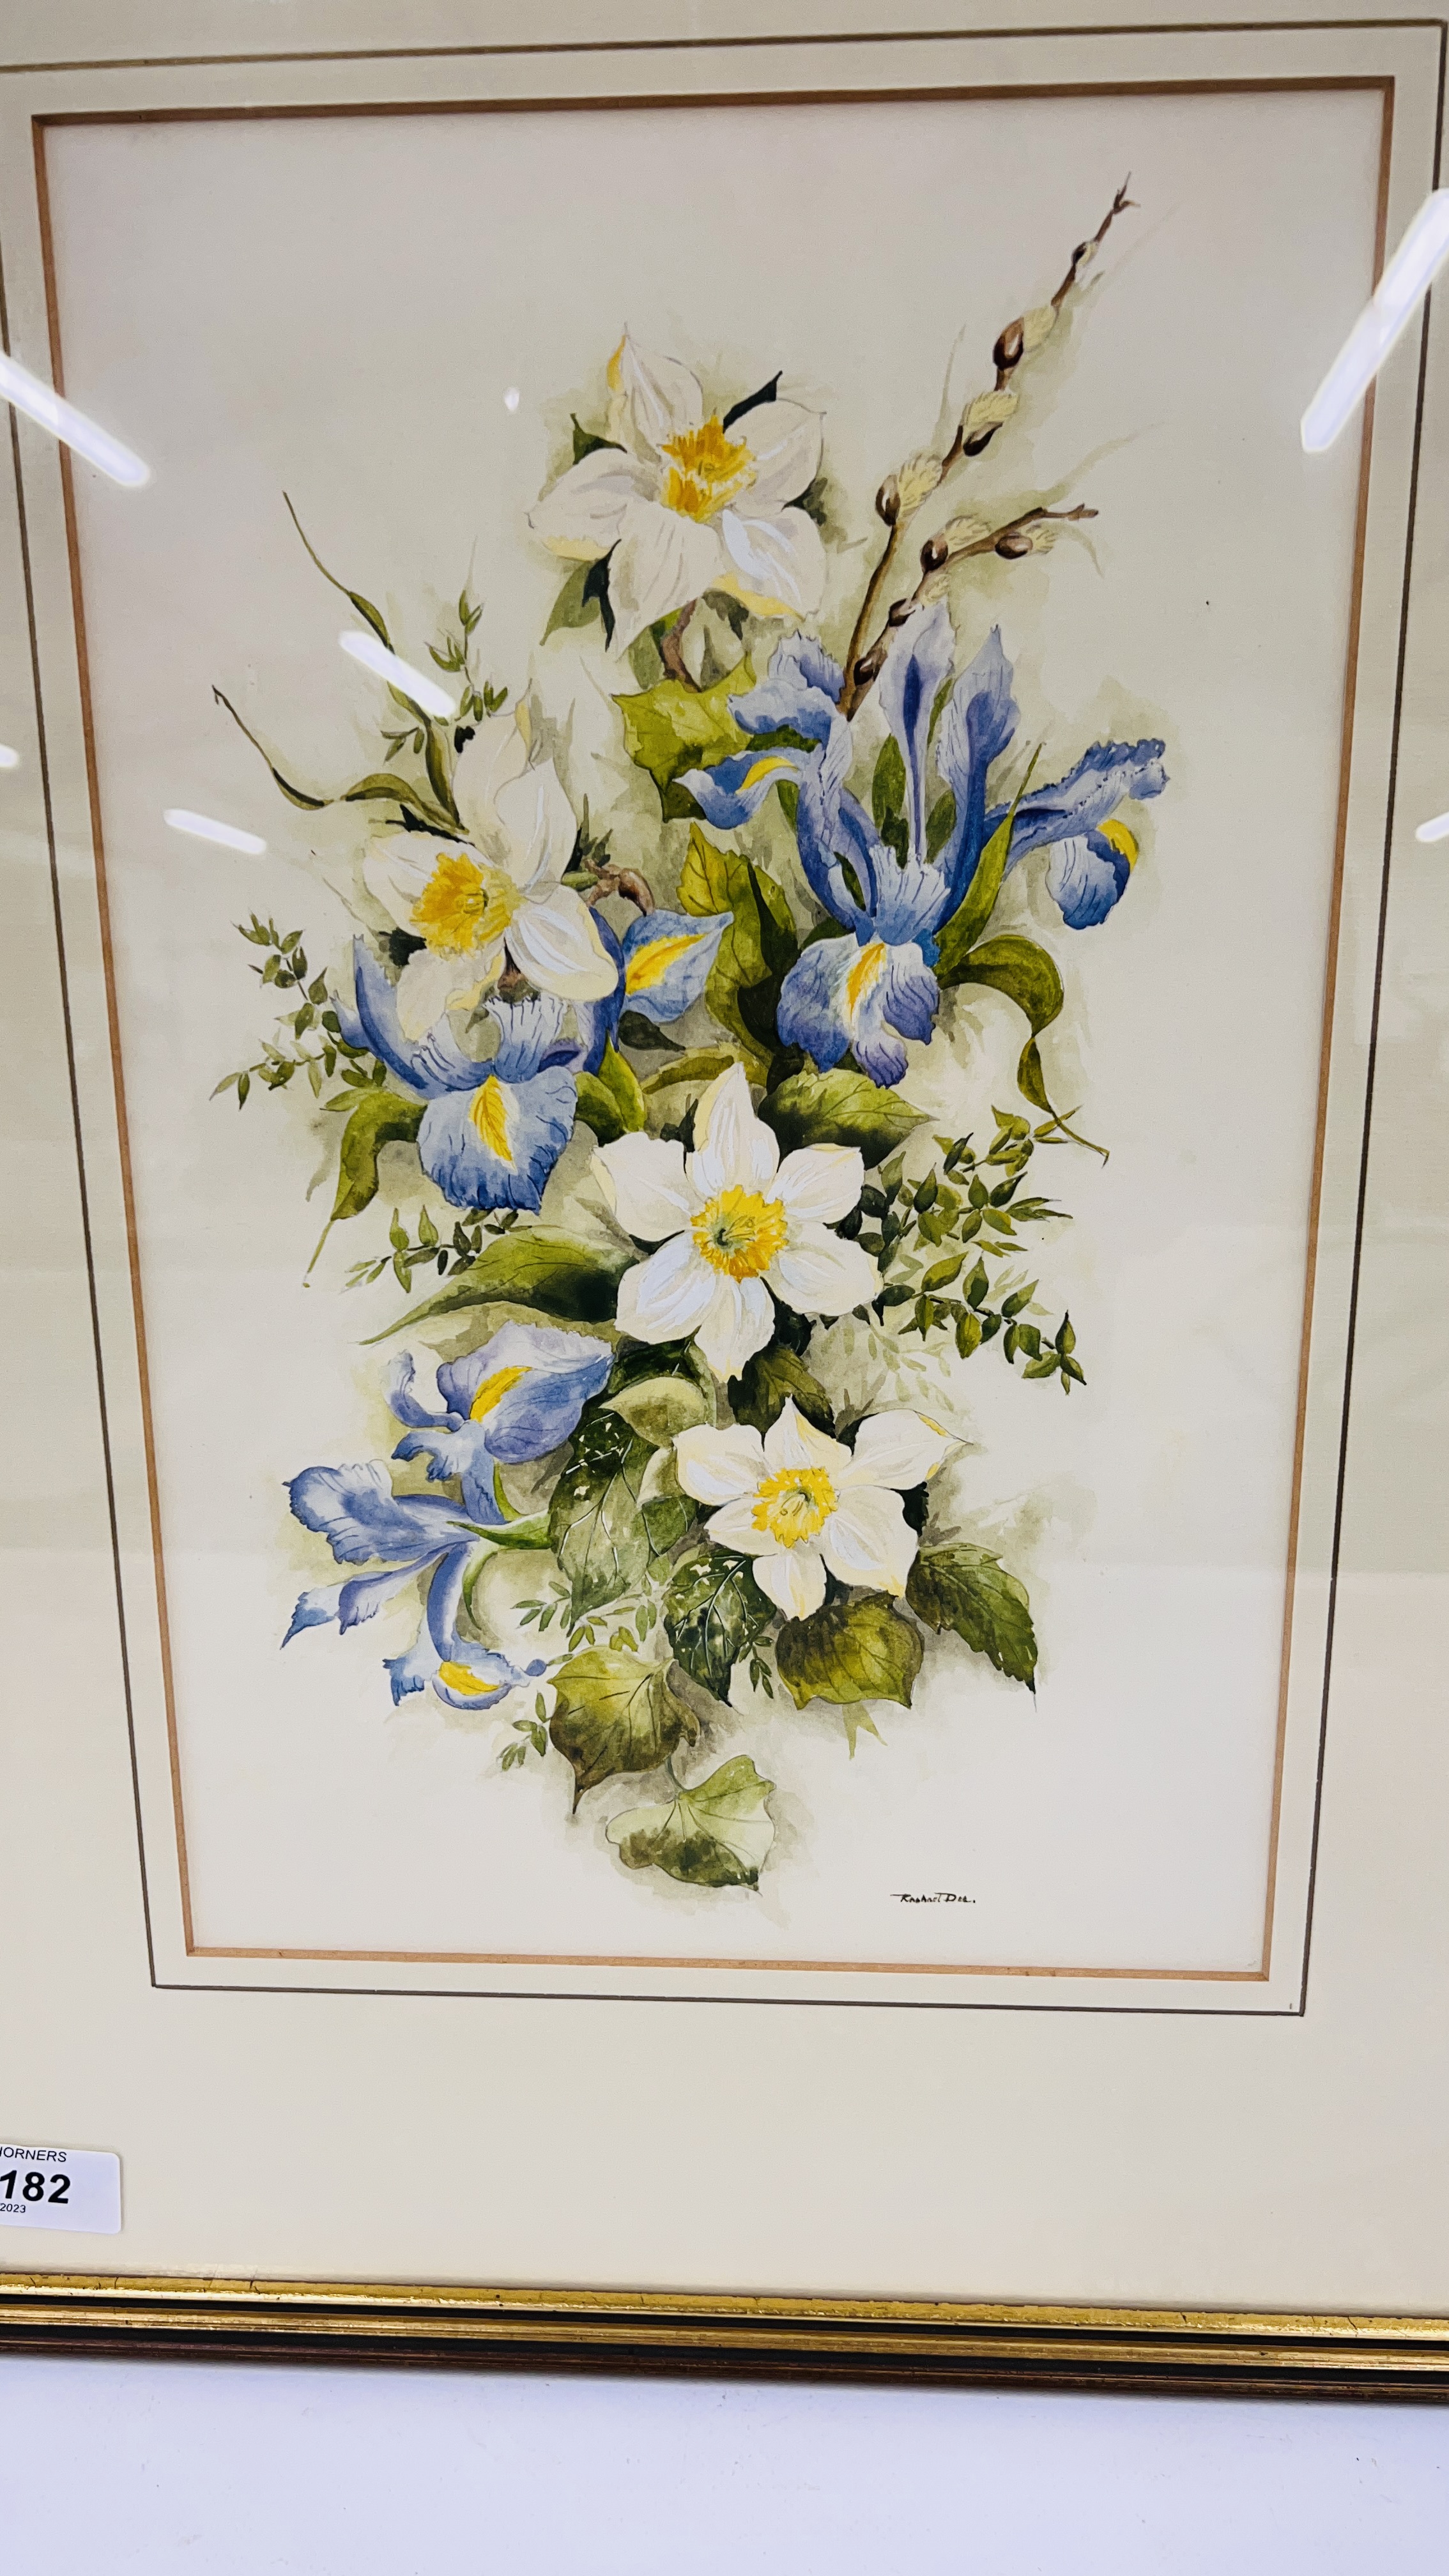 FRAMED AND GLAZED STILL LIFE WATERCOLOUR BY 'RACHEL DEE' TITLED 'IRISES AND DAFFODILS' 15" X 10". - Image 2 of 3